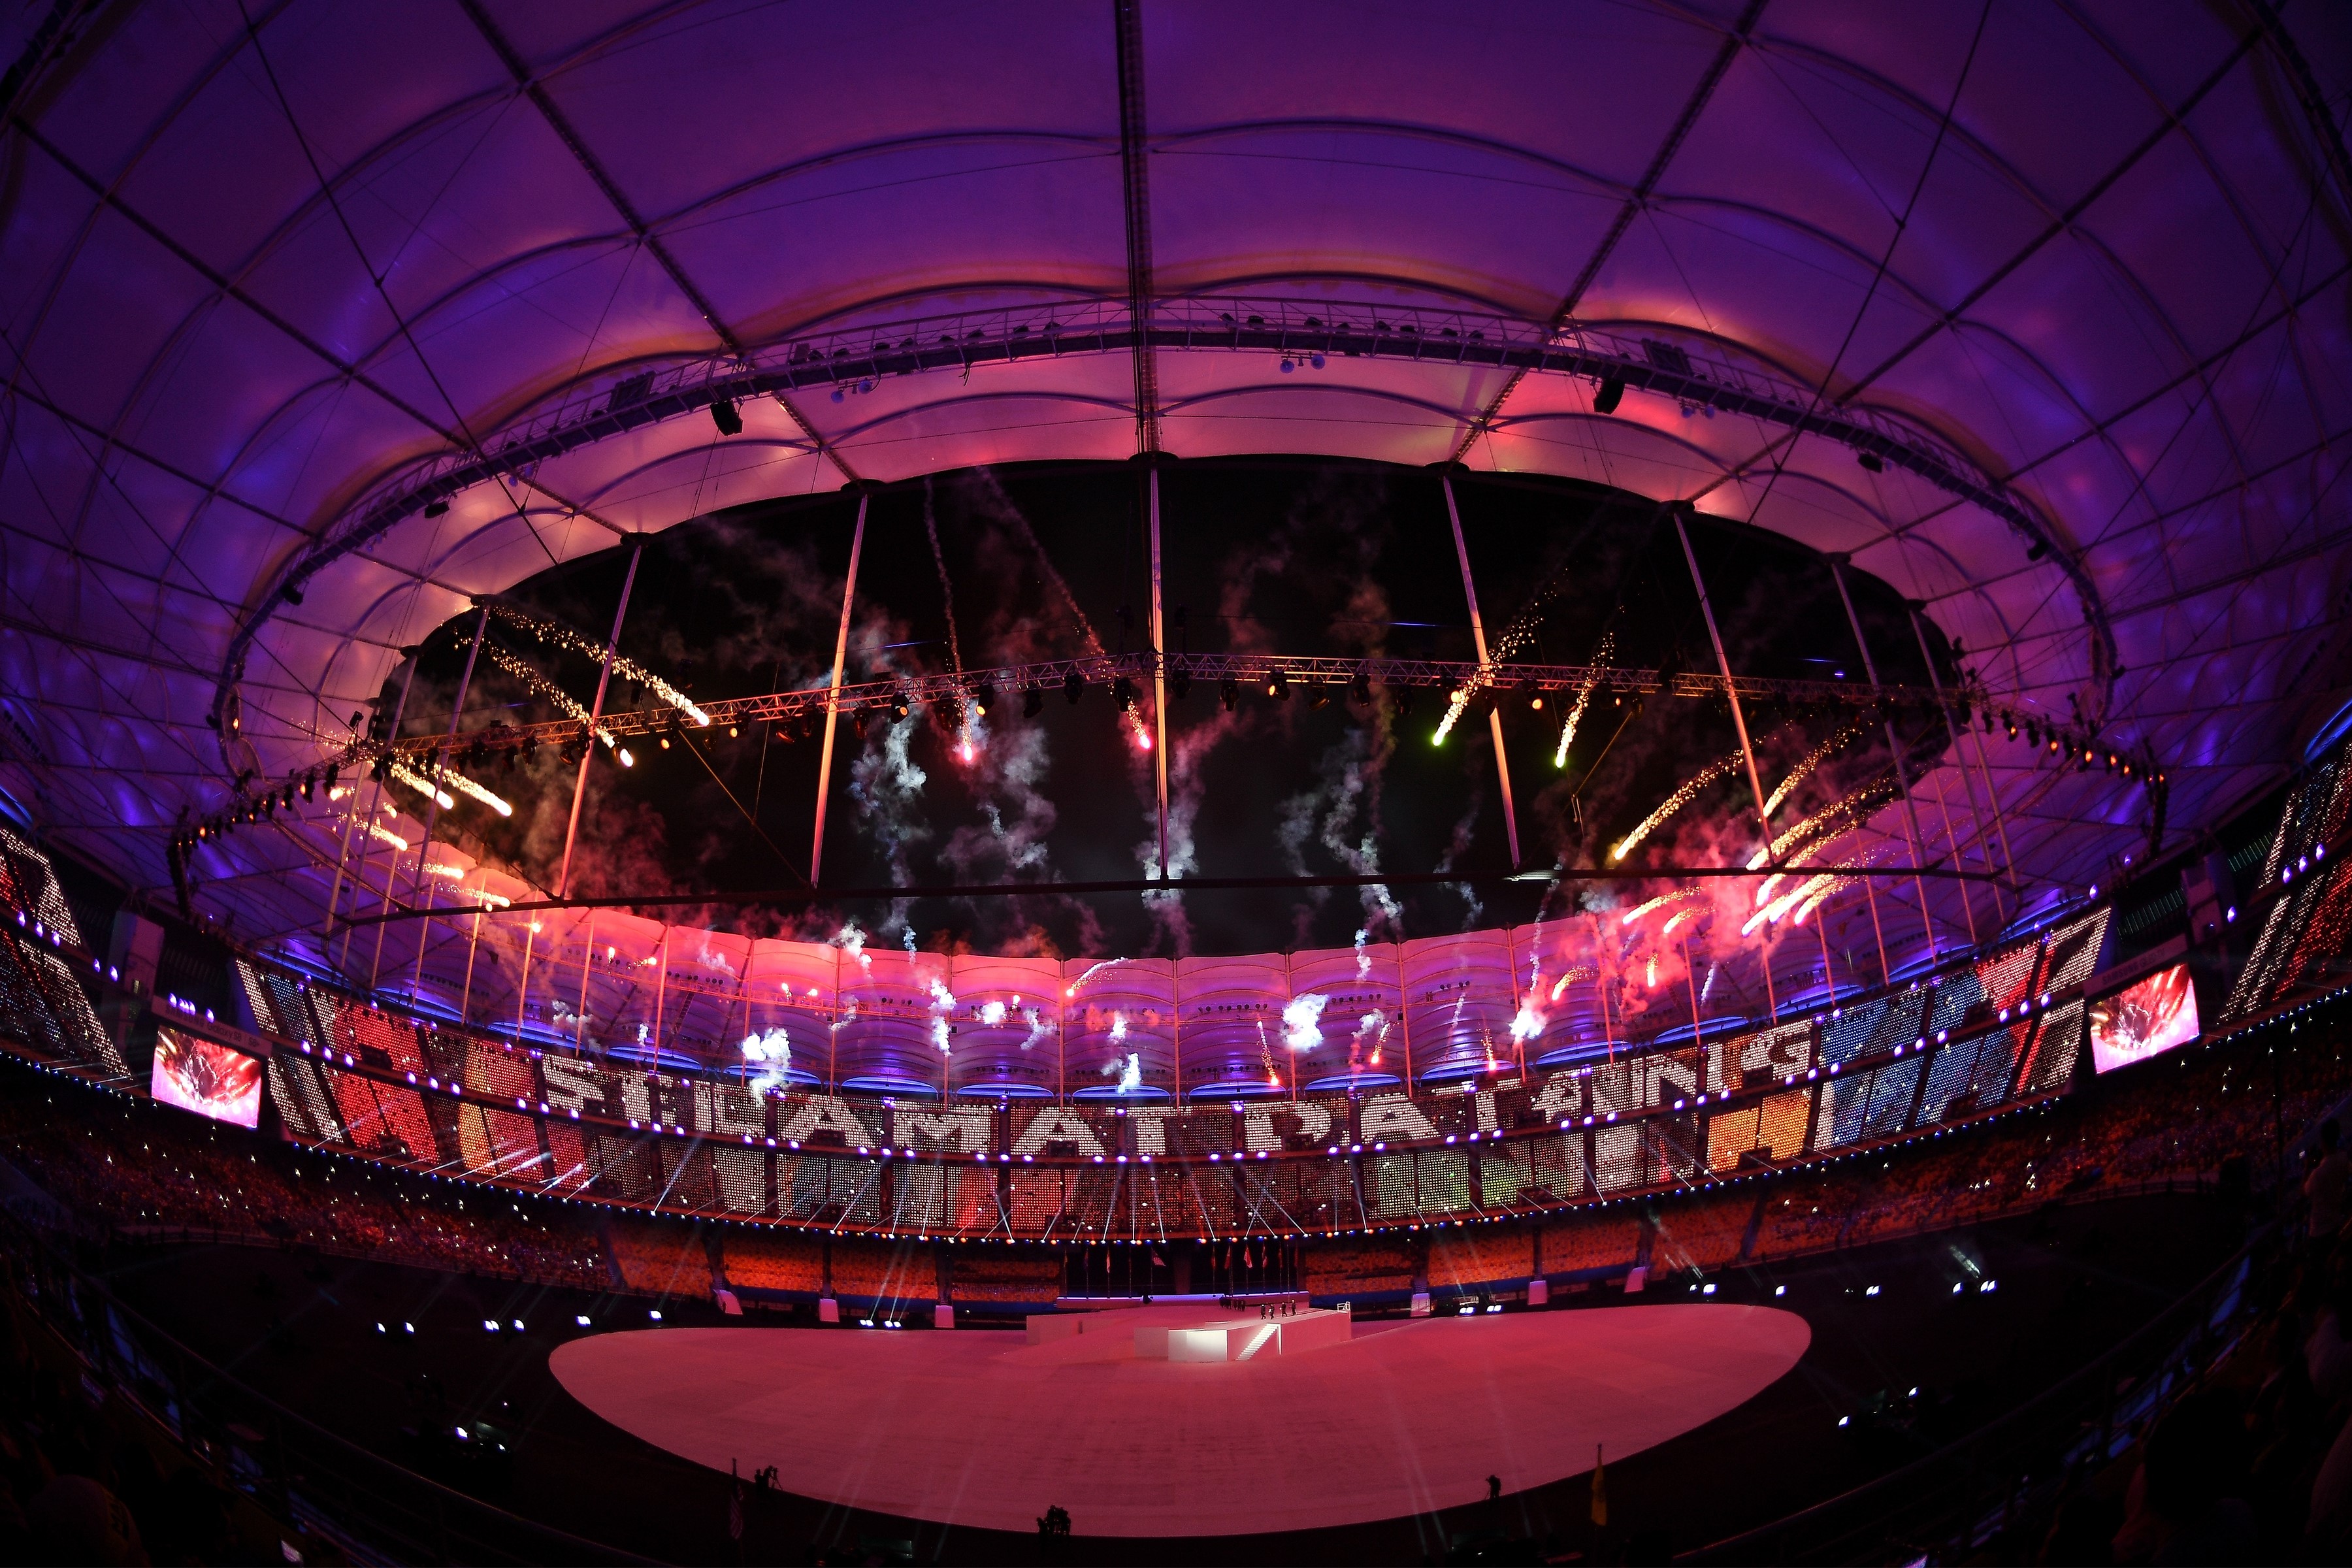 29th SEA Games officially open in Kuala Lumpur | Inquirer ...